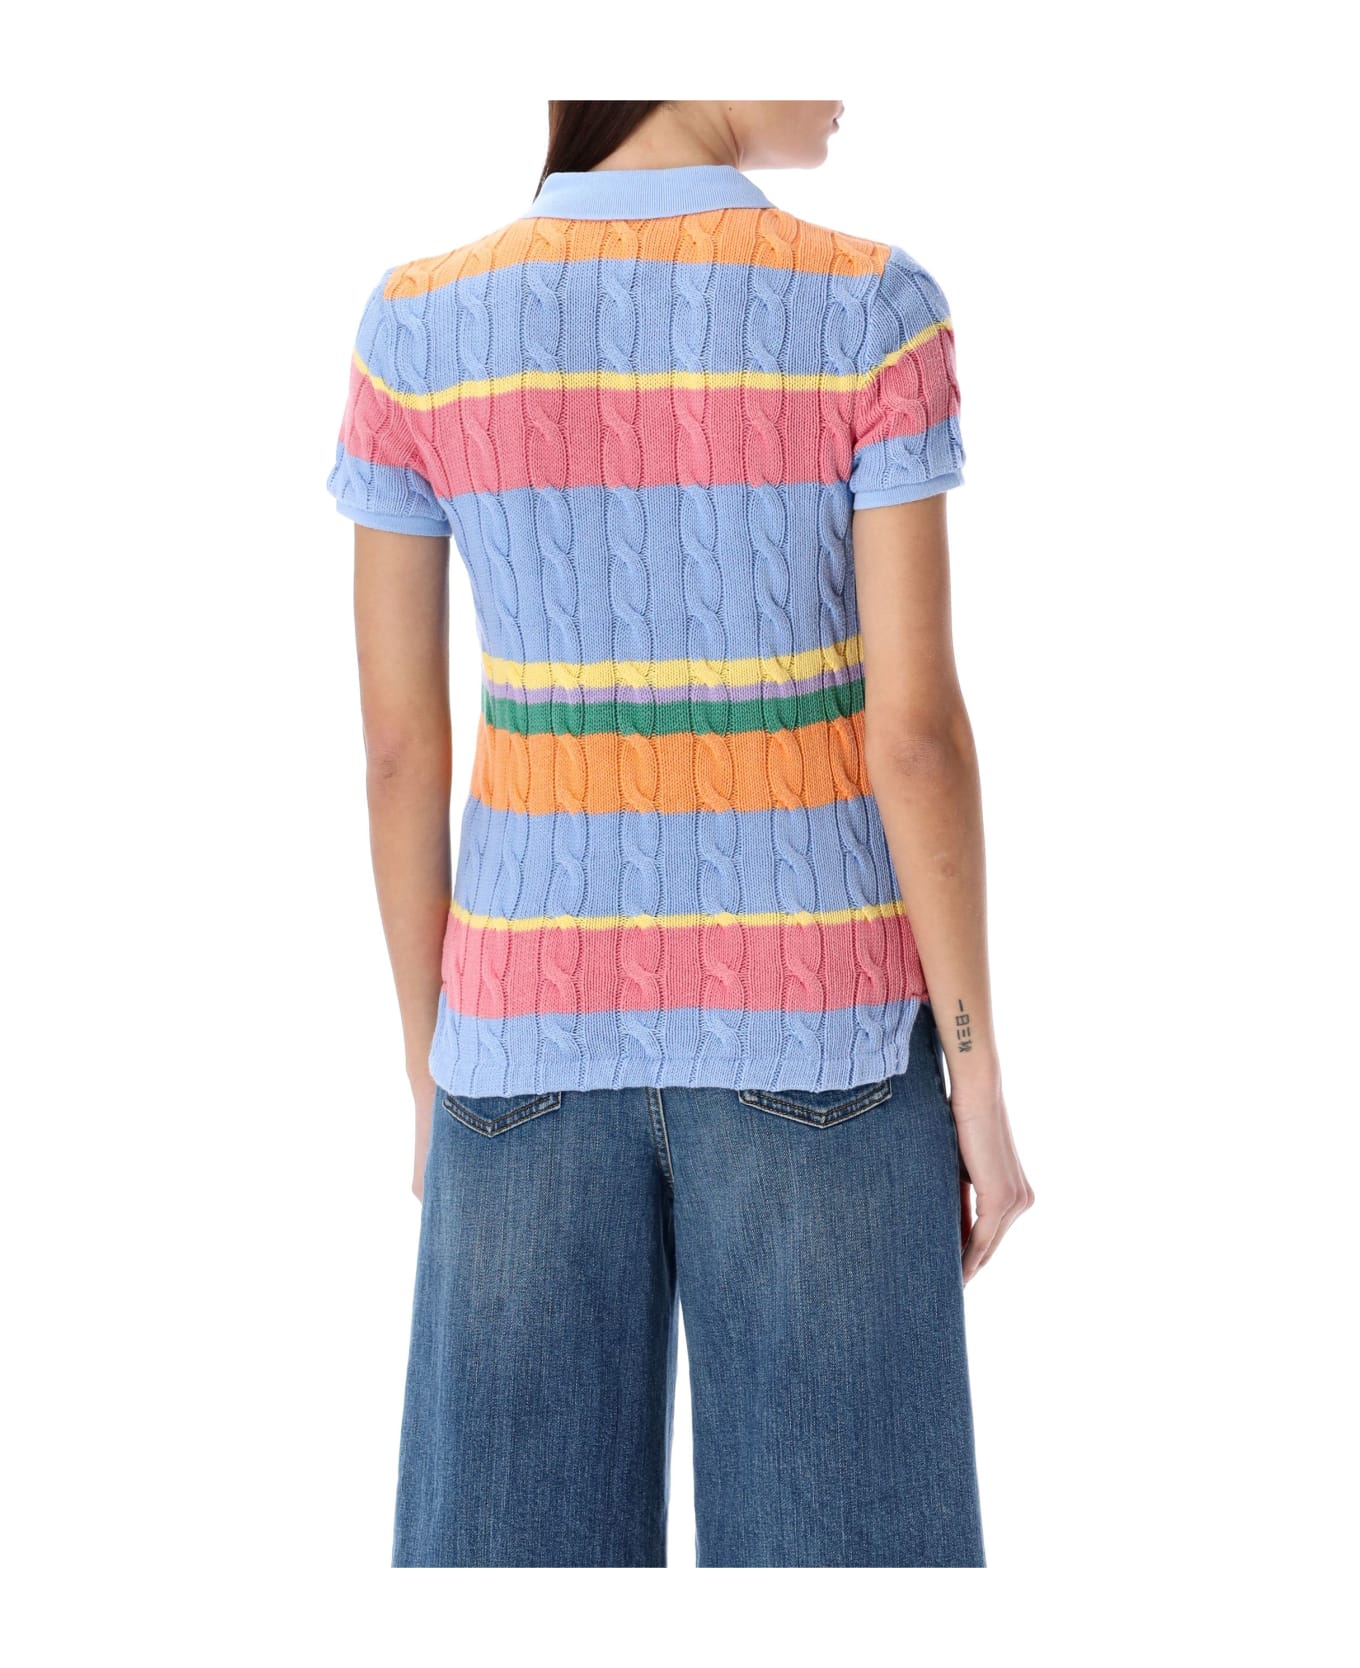 Polo Ralph Lauren Striped Cable Knit Polo Shirt - LIGHT BLUE ROSE MULTI